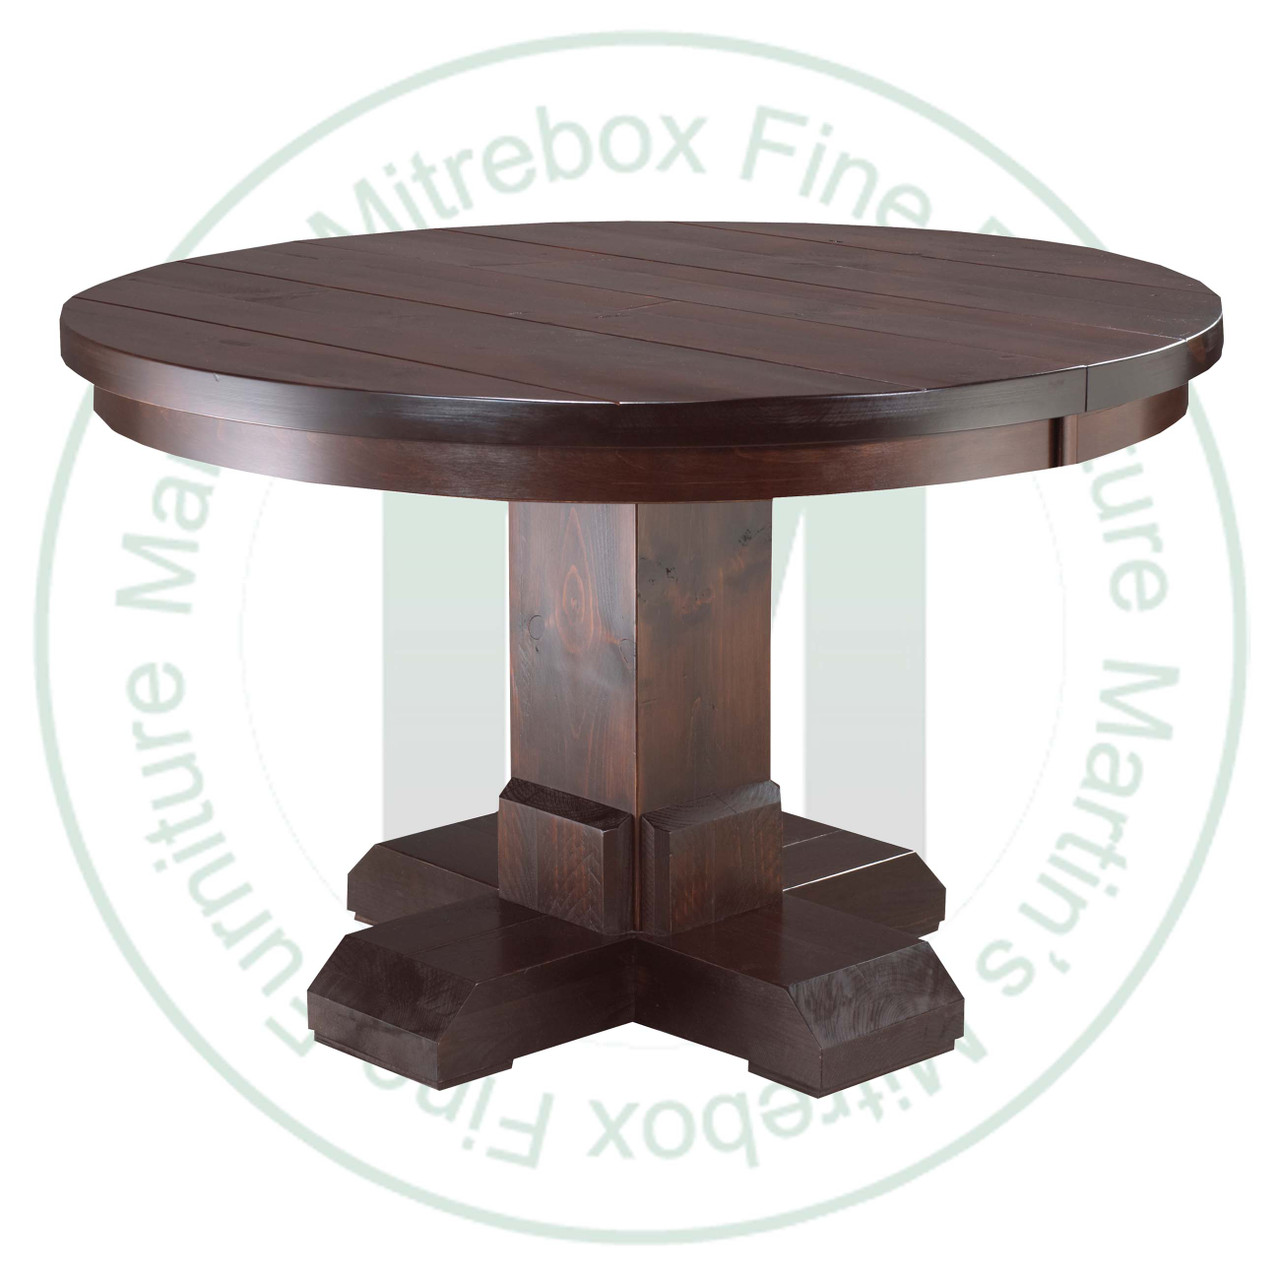 Wormy Maple Shrewsbury Single Pedestal Table 36''D x 48''W x 30''H Round Solid Table. Table Has 1.25'' Thick Top.